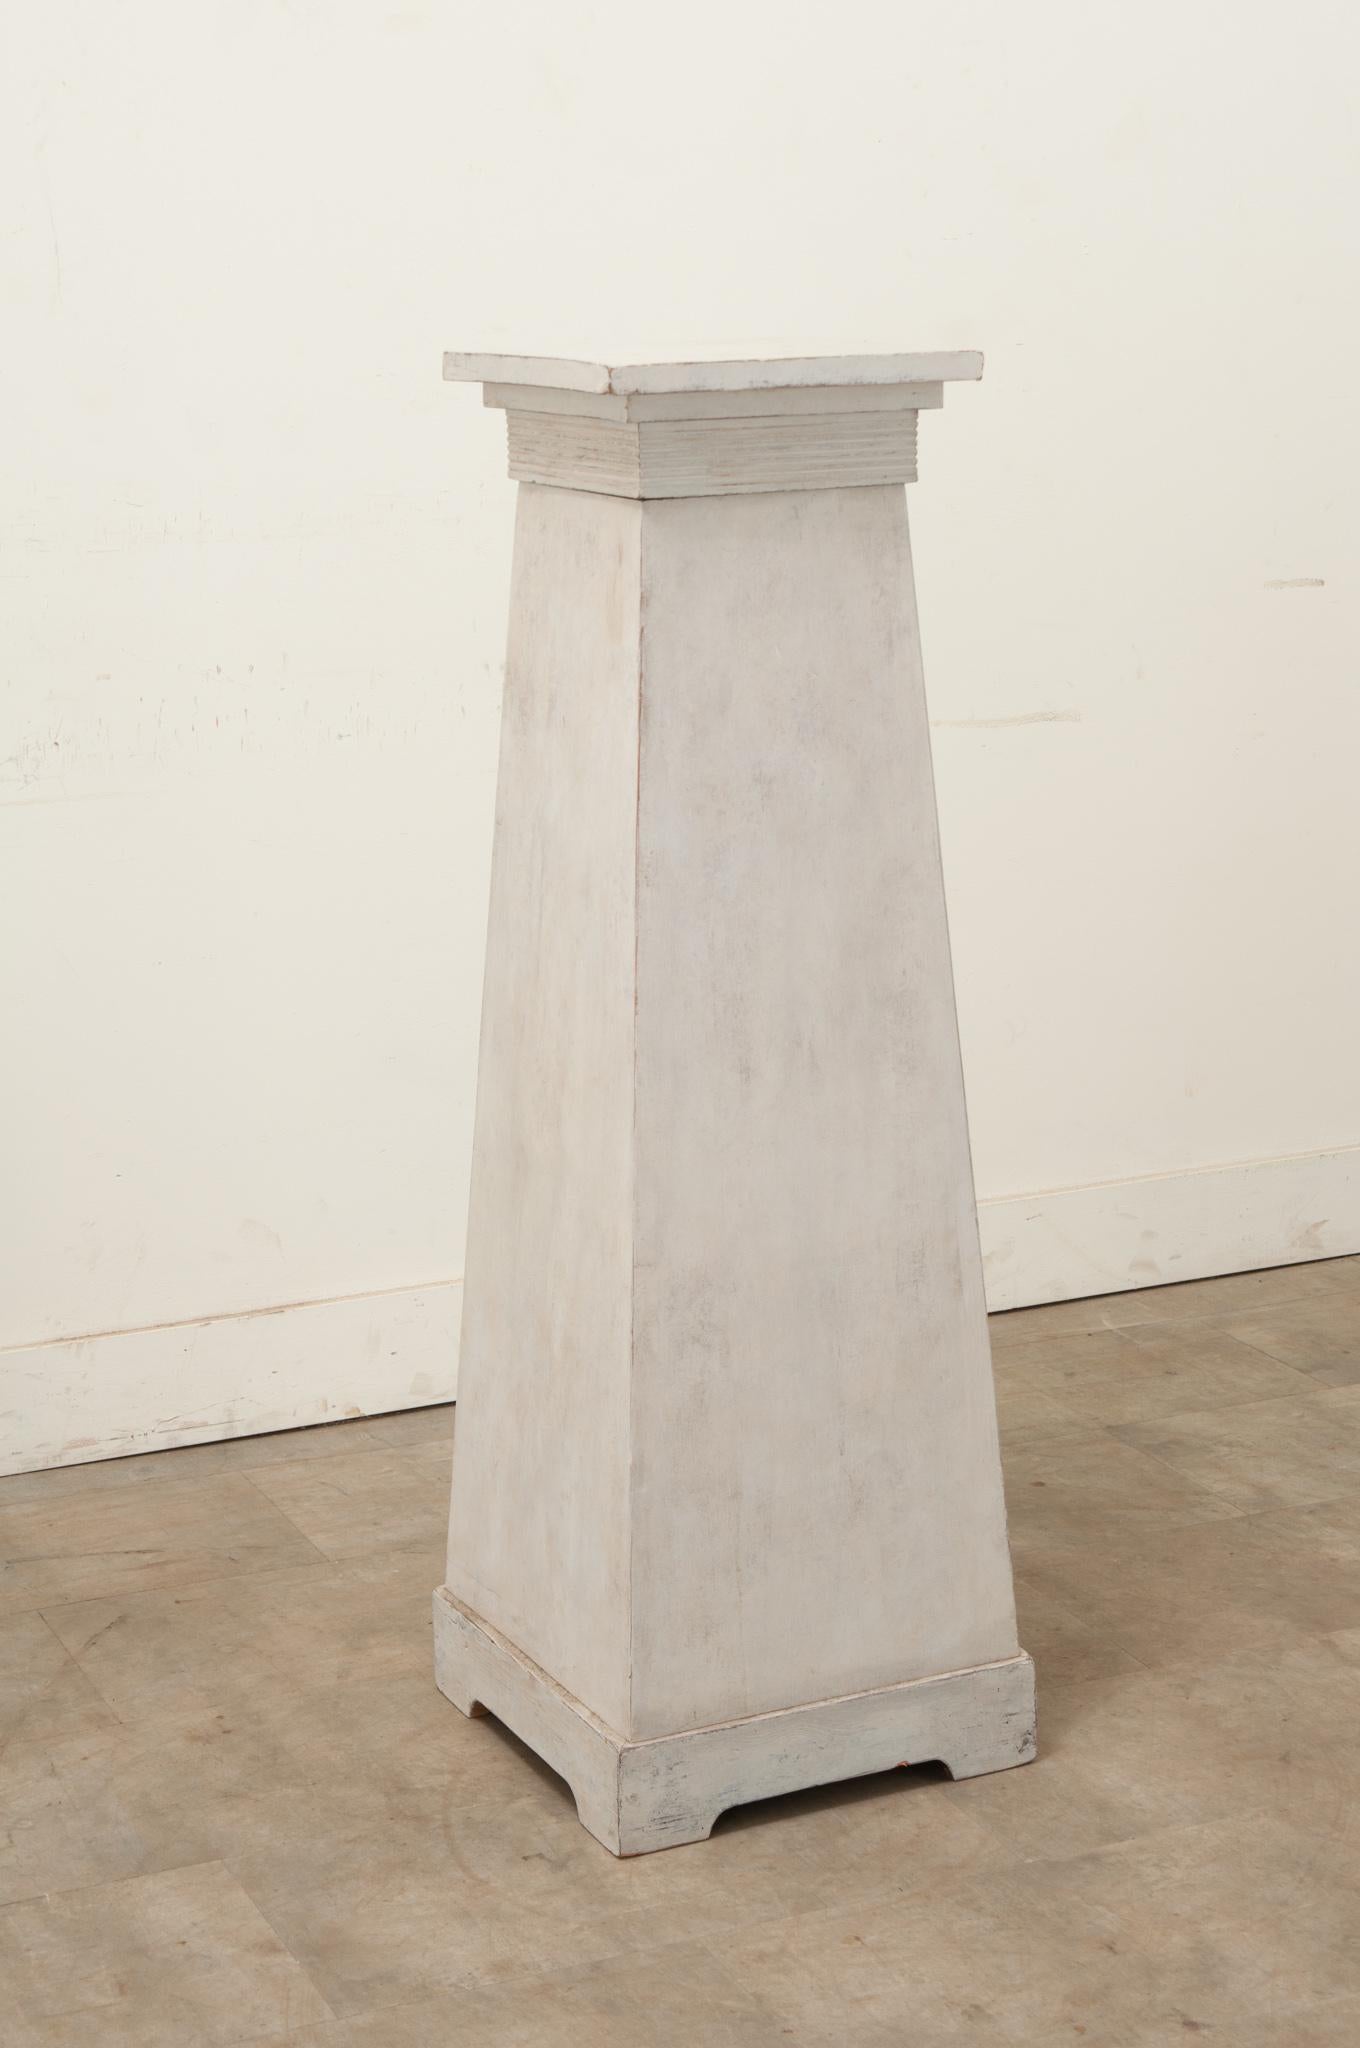 A stately vintage painted column from Sweden. This column has a removable top and a worn painted finish terminating on simple block feet. Perfect for housing a statue or plant in your interior. Be sure to view the detailed images for the current